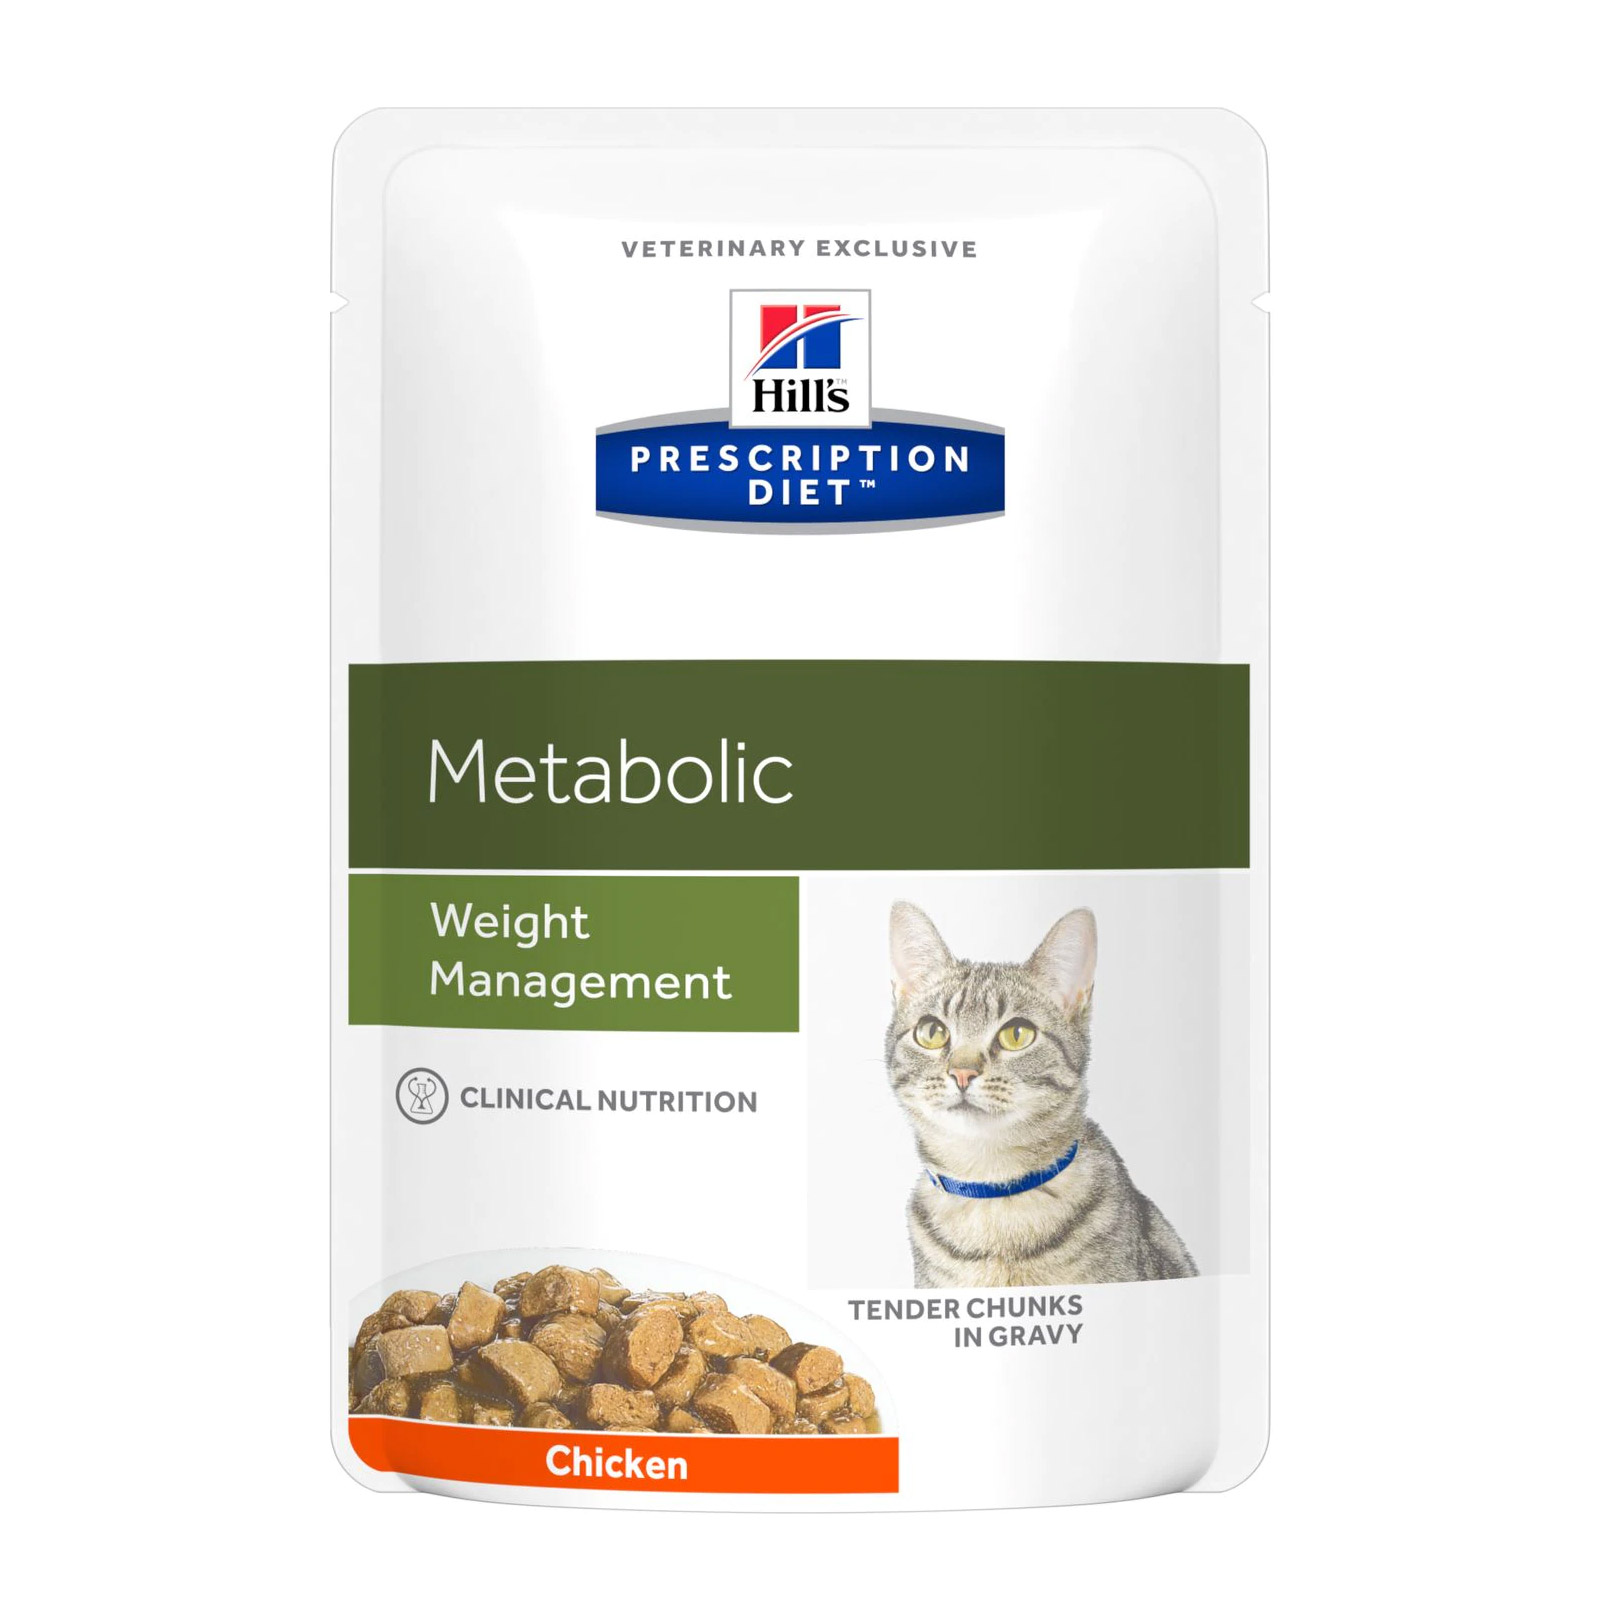 Hill's Prescription Diet Metabolic Cat Food for Food